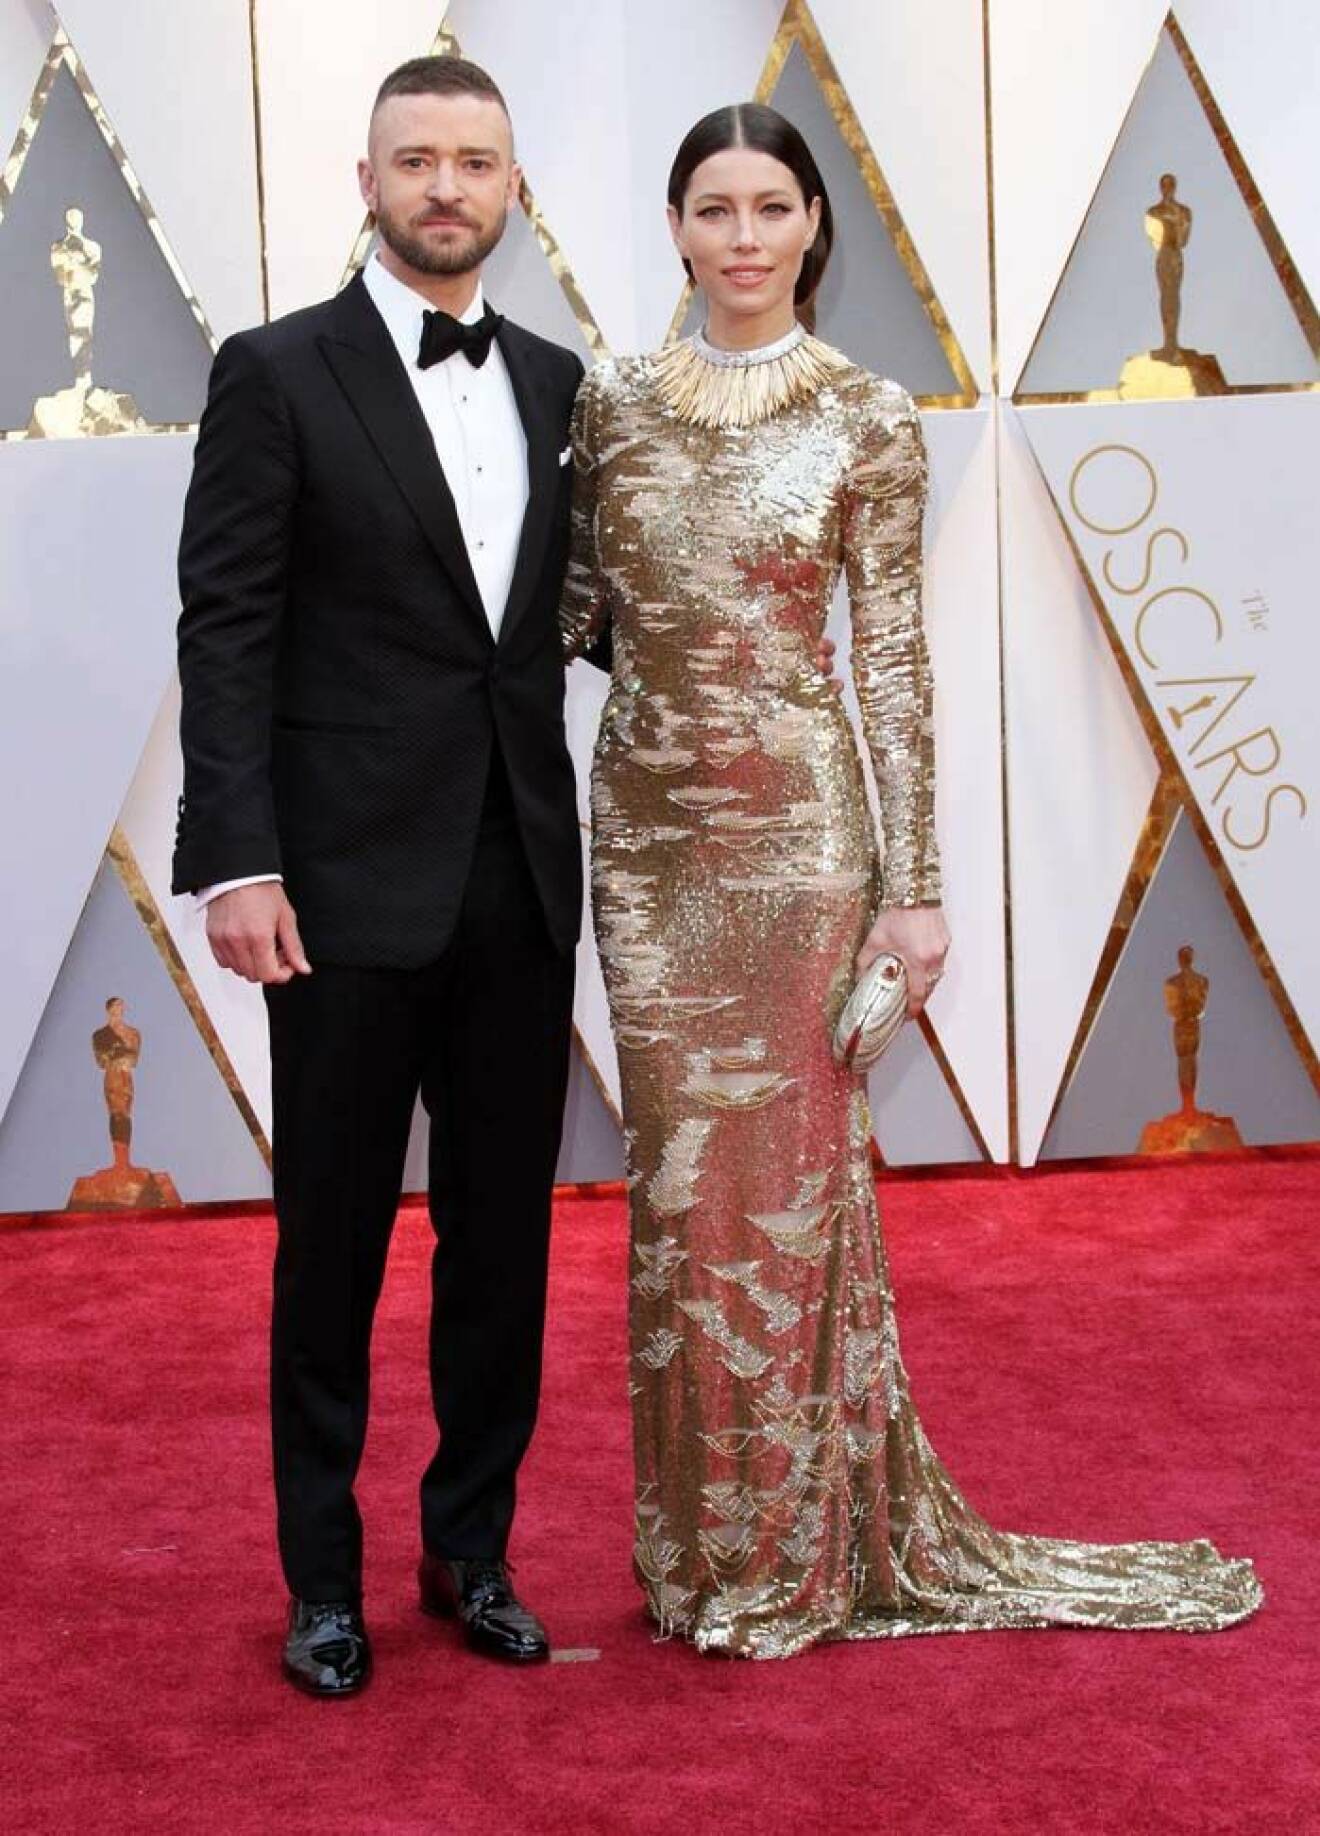 89th Annual Academy Awards (Oscars 2017) - Arrivals held at the Dolby Theatre at the Hollywood & Highland Center. Featuring: Jessica Biel, Justin Timberlake Where: Los Angeles, California, United States When: 26 Feb 2017 Credit: Adriana M. Barraza/WENN.com